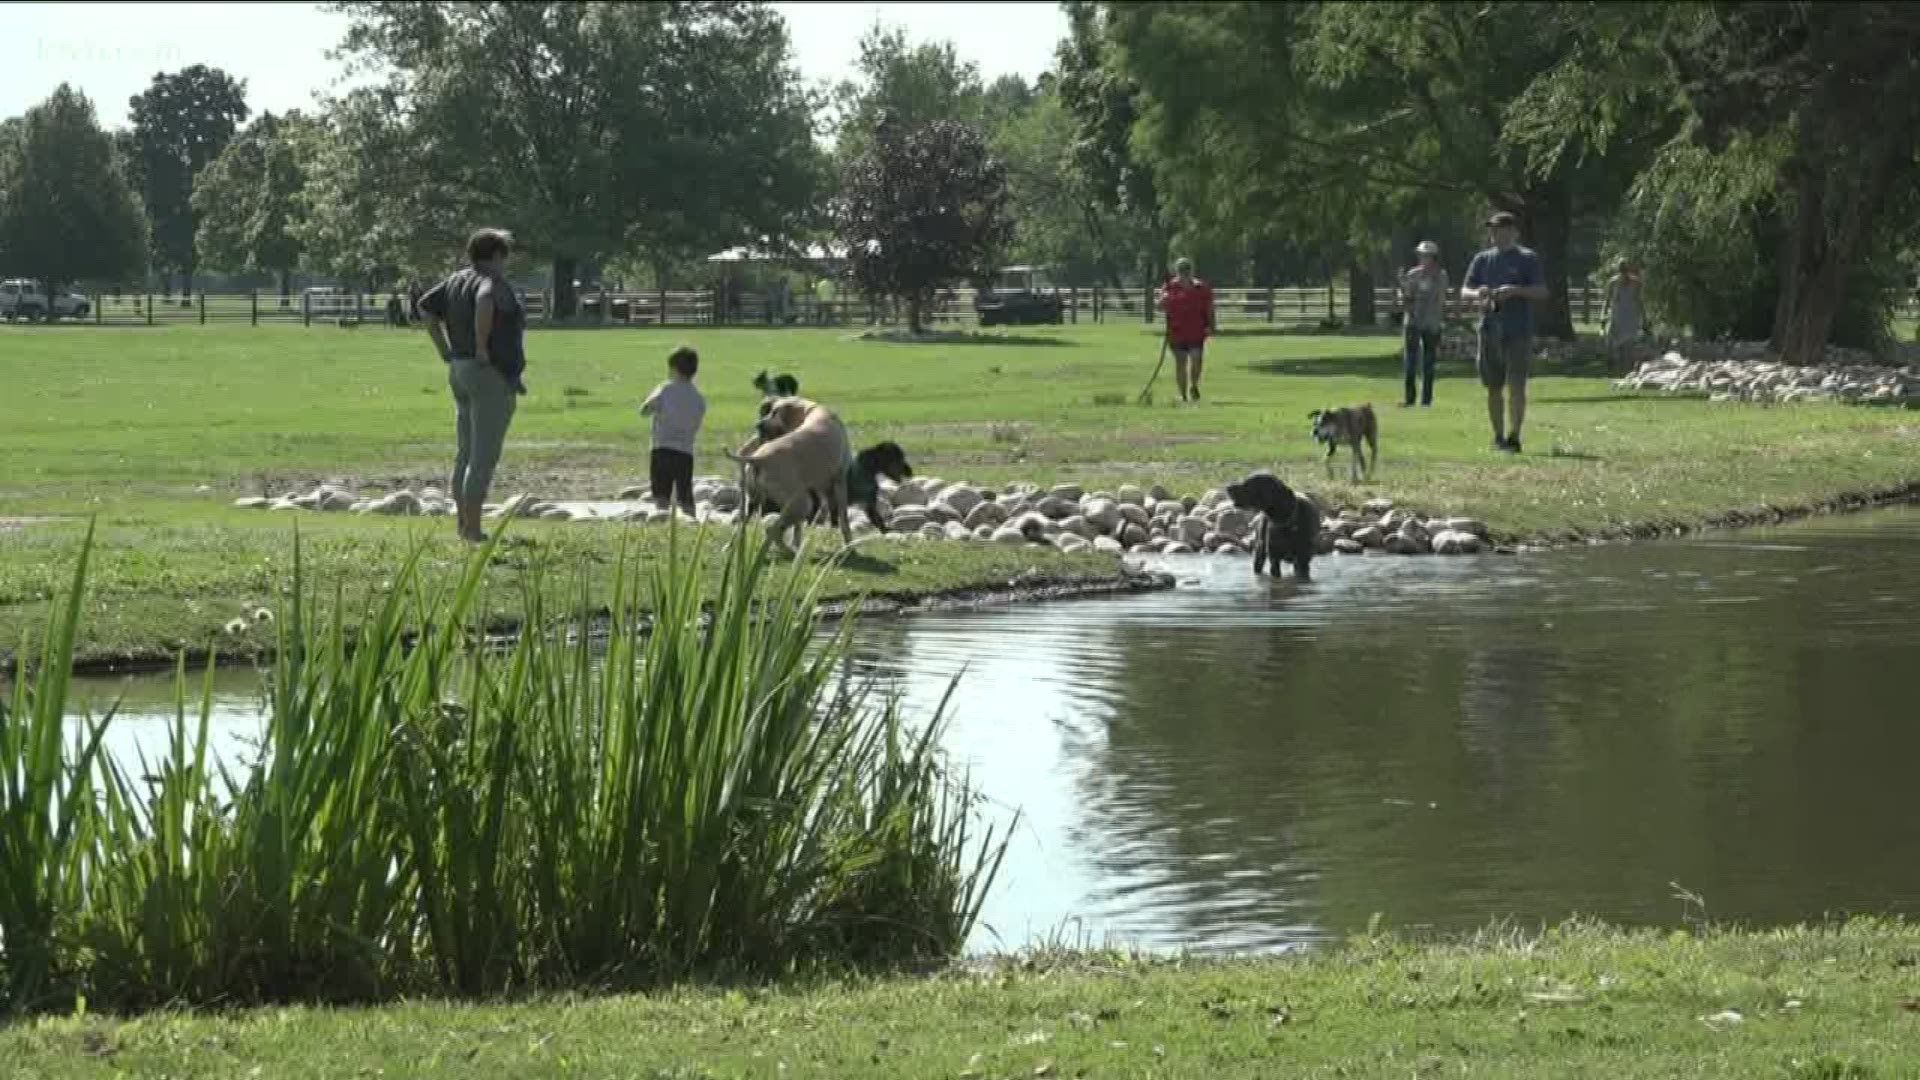 Families flocked to the park for the grand opening of the new dog island.